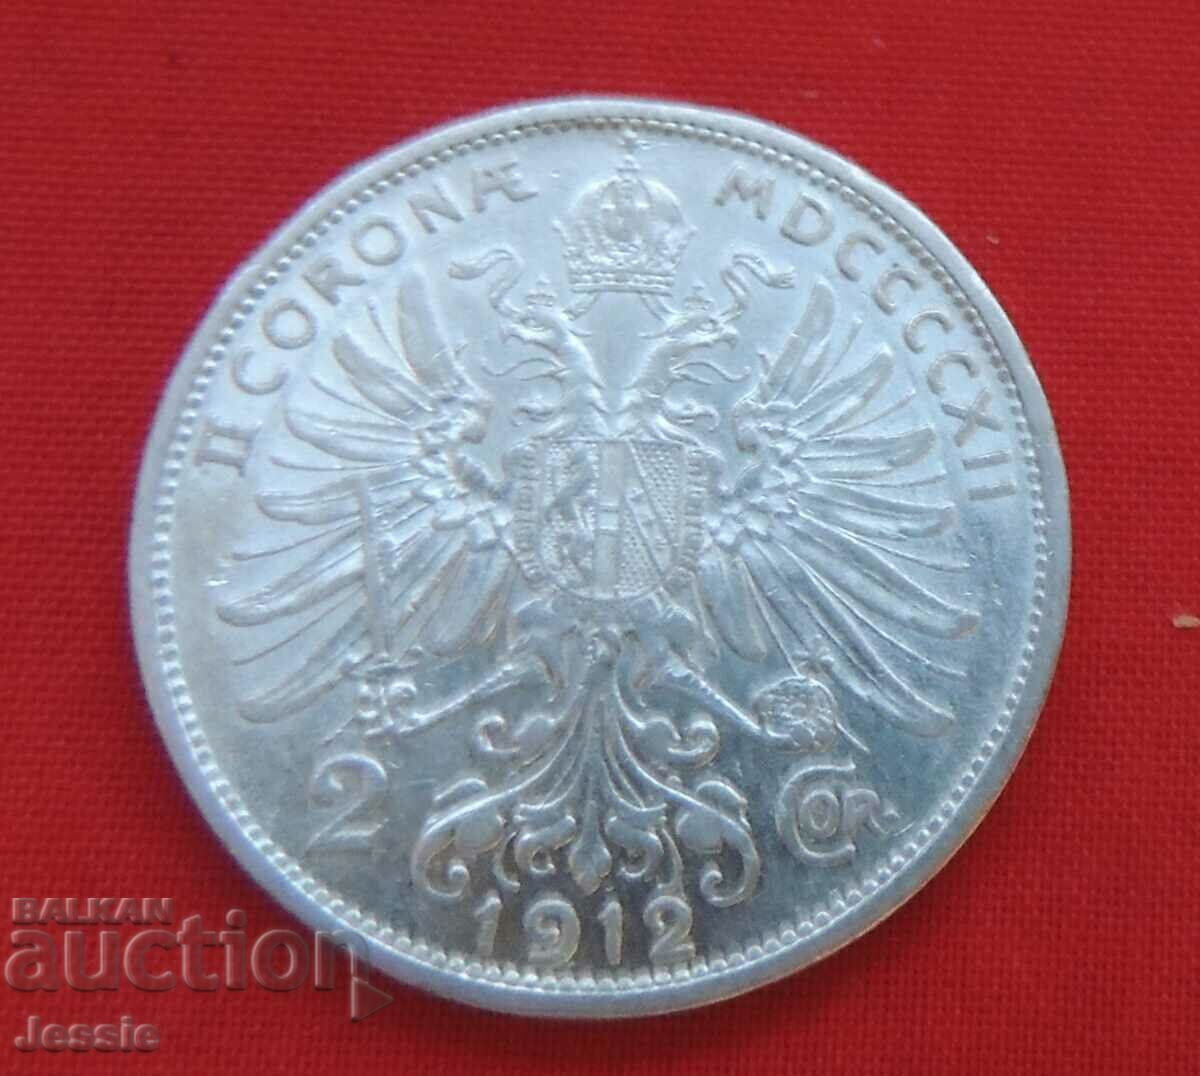 2 crowns 1912 Austria-Hungary silver